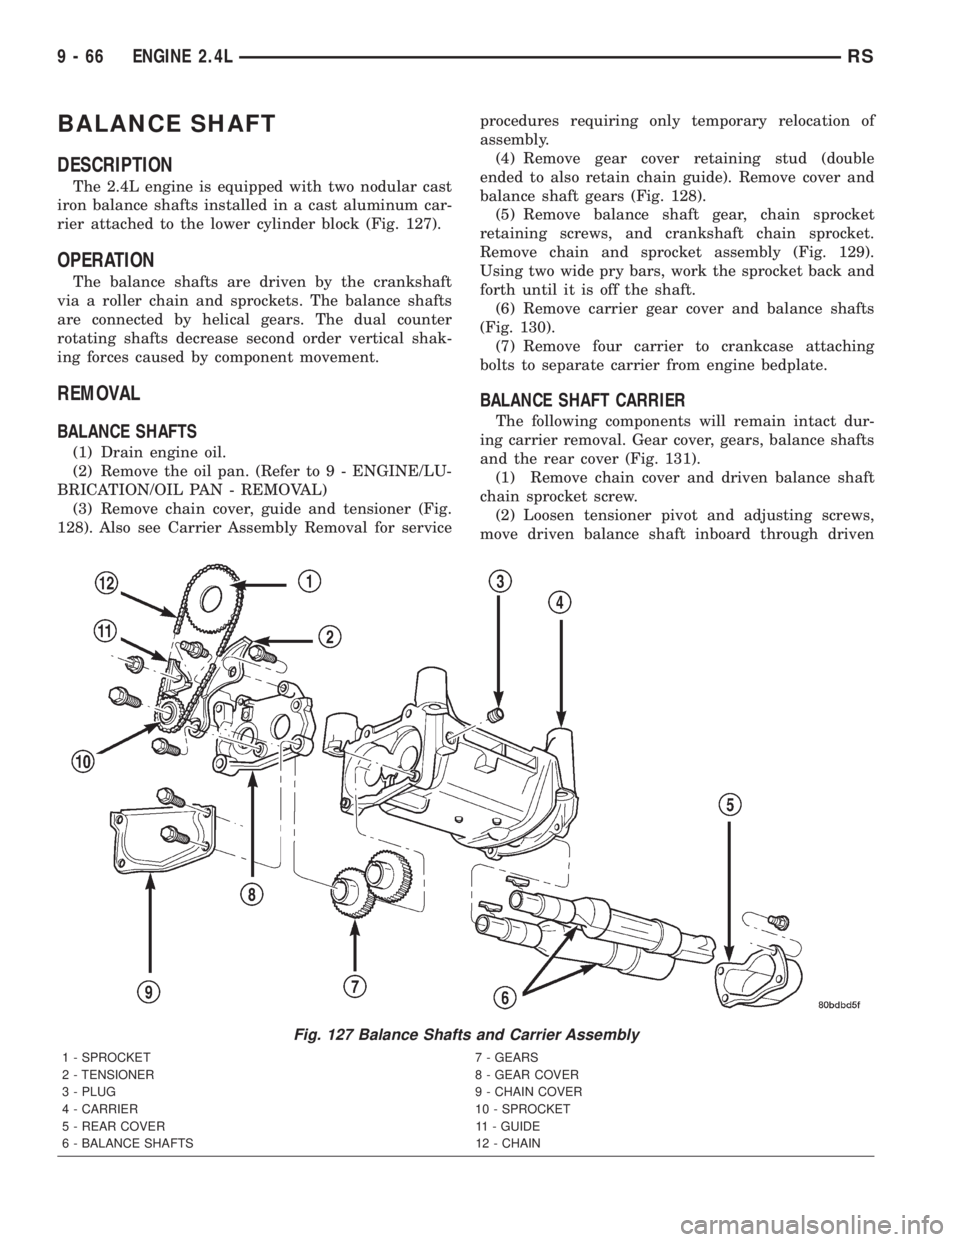 CHRYSLER VOYAGER 2001  Service Manual BALANCE SHAFT
DESCRIPTION
The 2.4L engine is equipped with two nodular cast
iron balance shafts installed in a cast aluminum car-
rier attached to the lower cylinder block (Fig. 127).
OPERATION
The ba